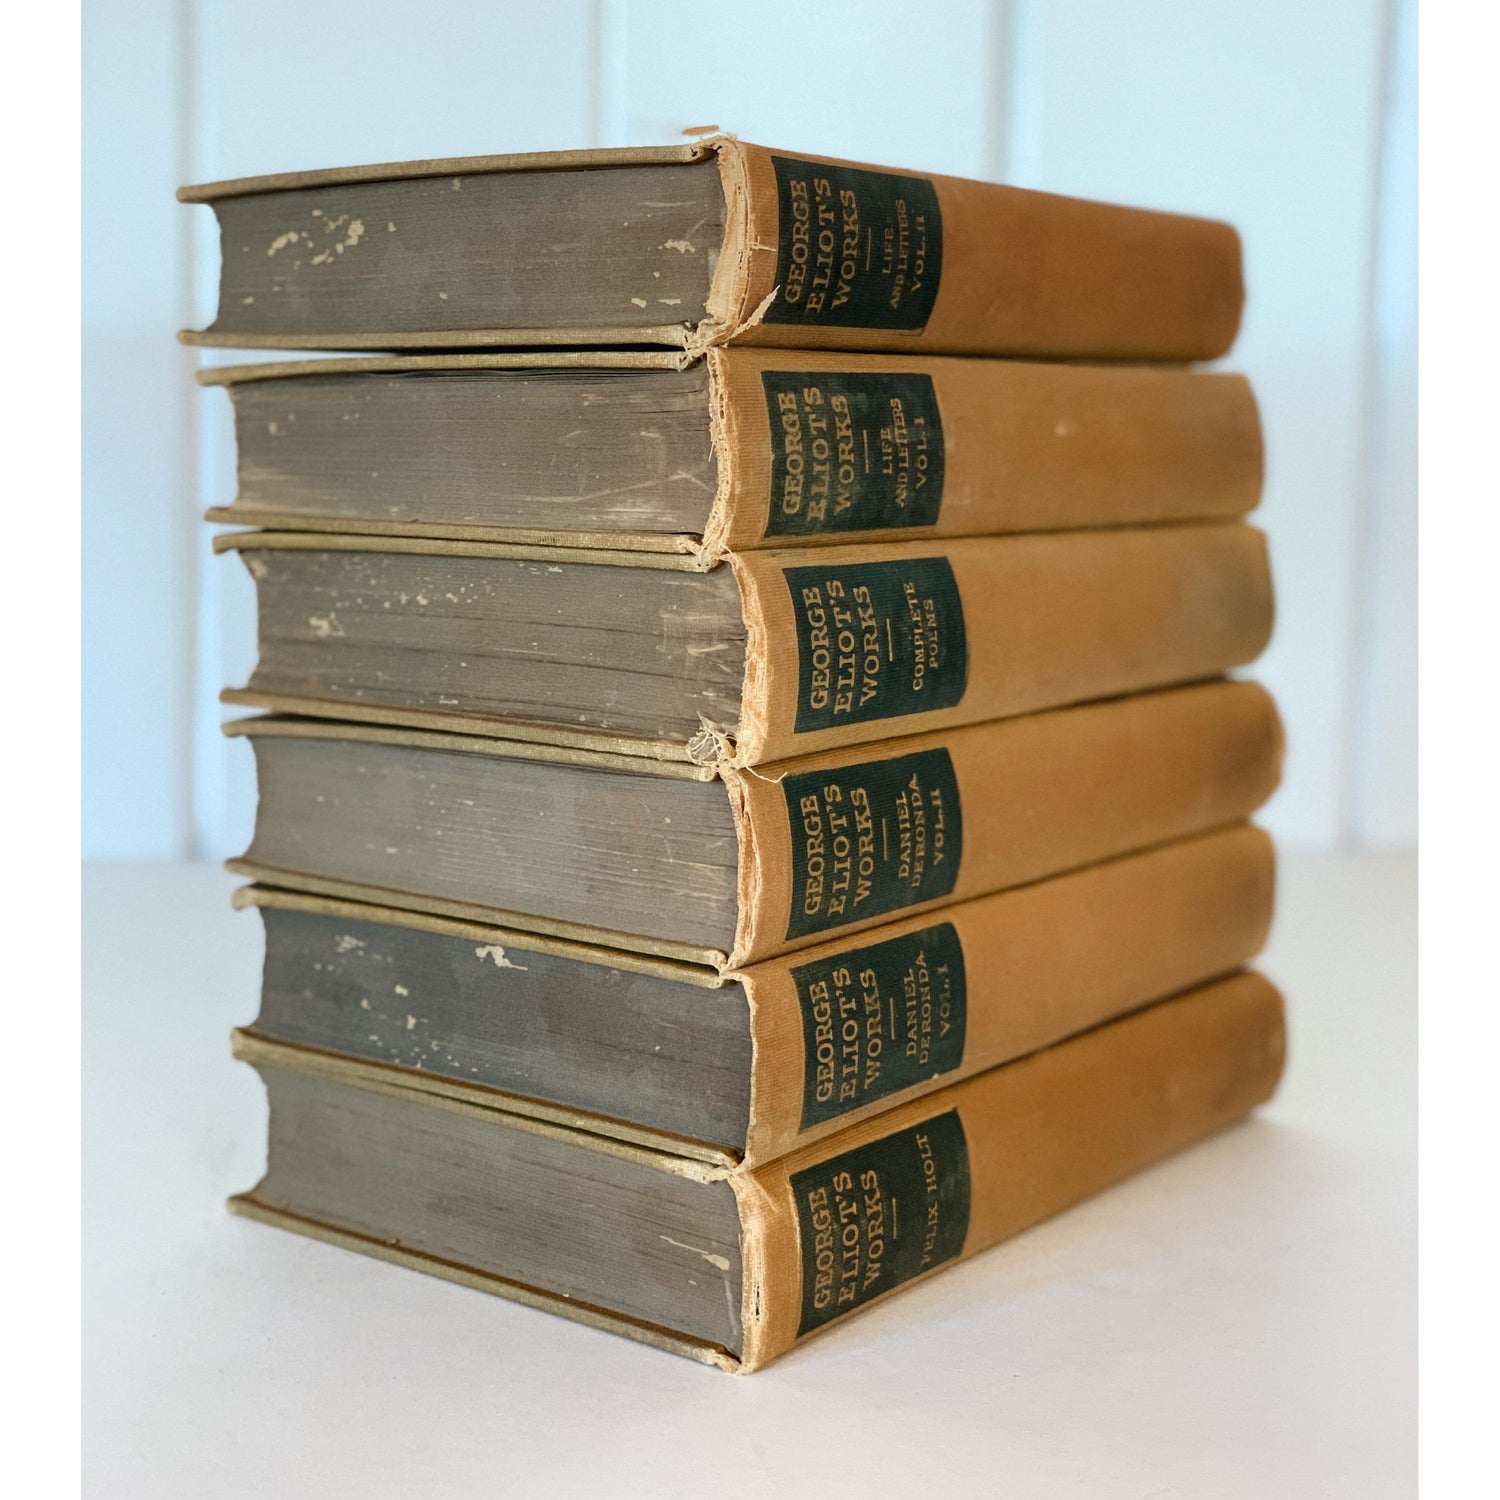 The Personal Edition of George Eliot’s Works 1904 Partial Set, Marigold Mustard Yellow Book Set